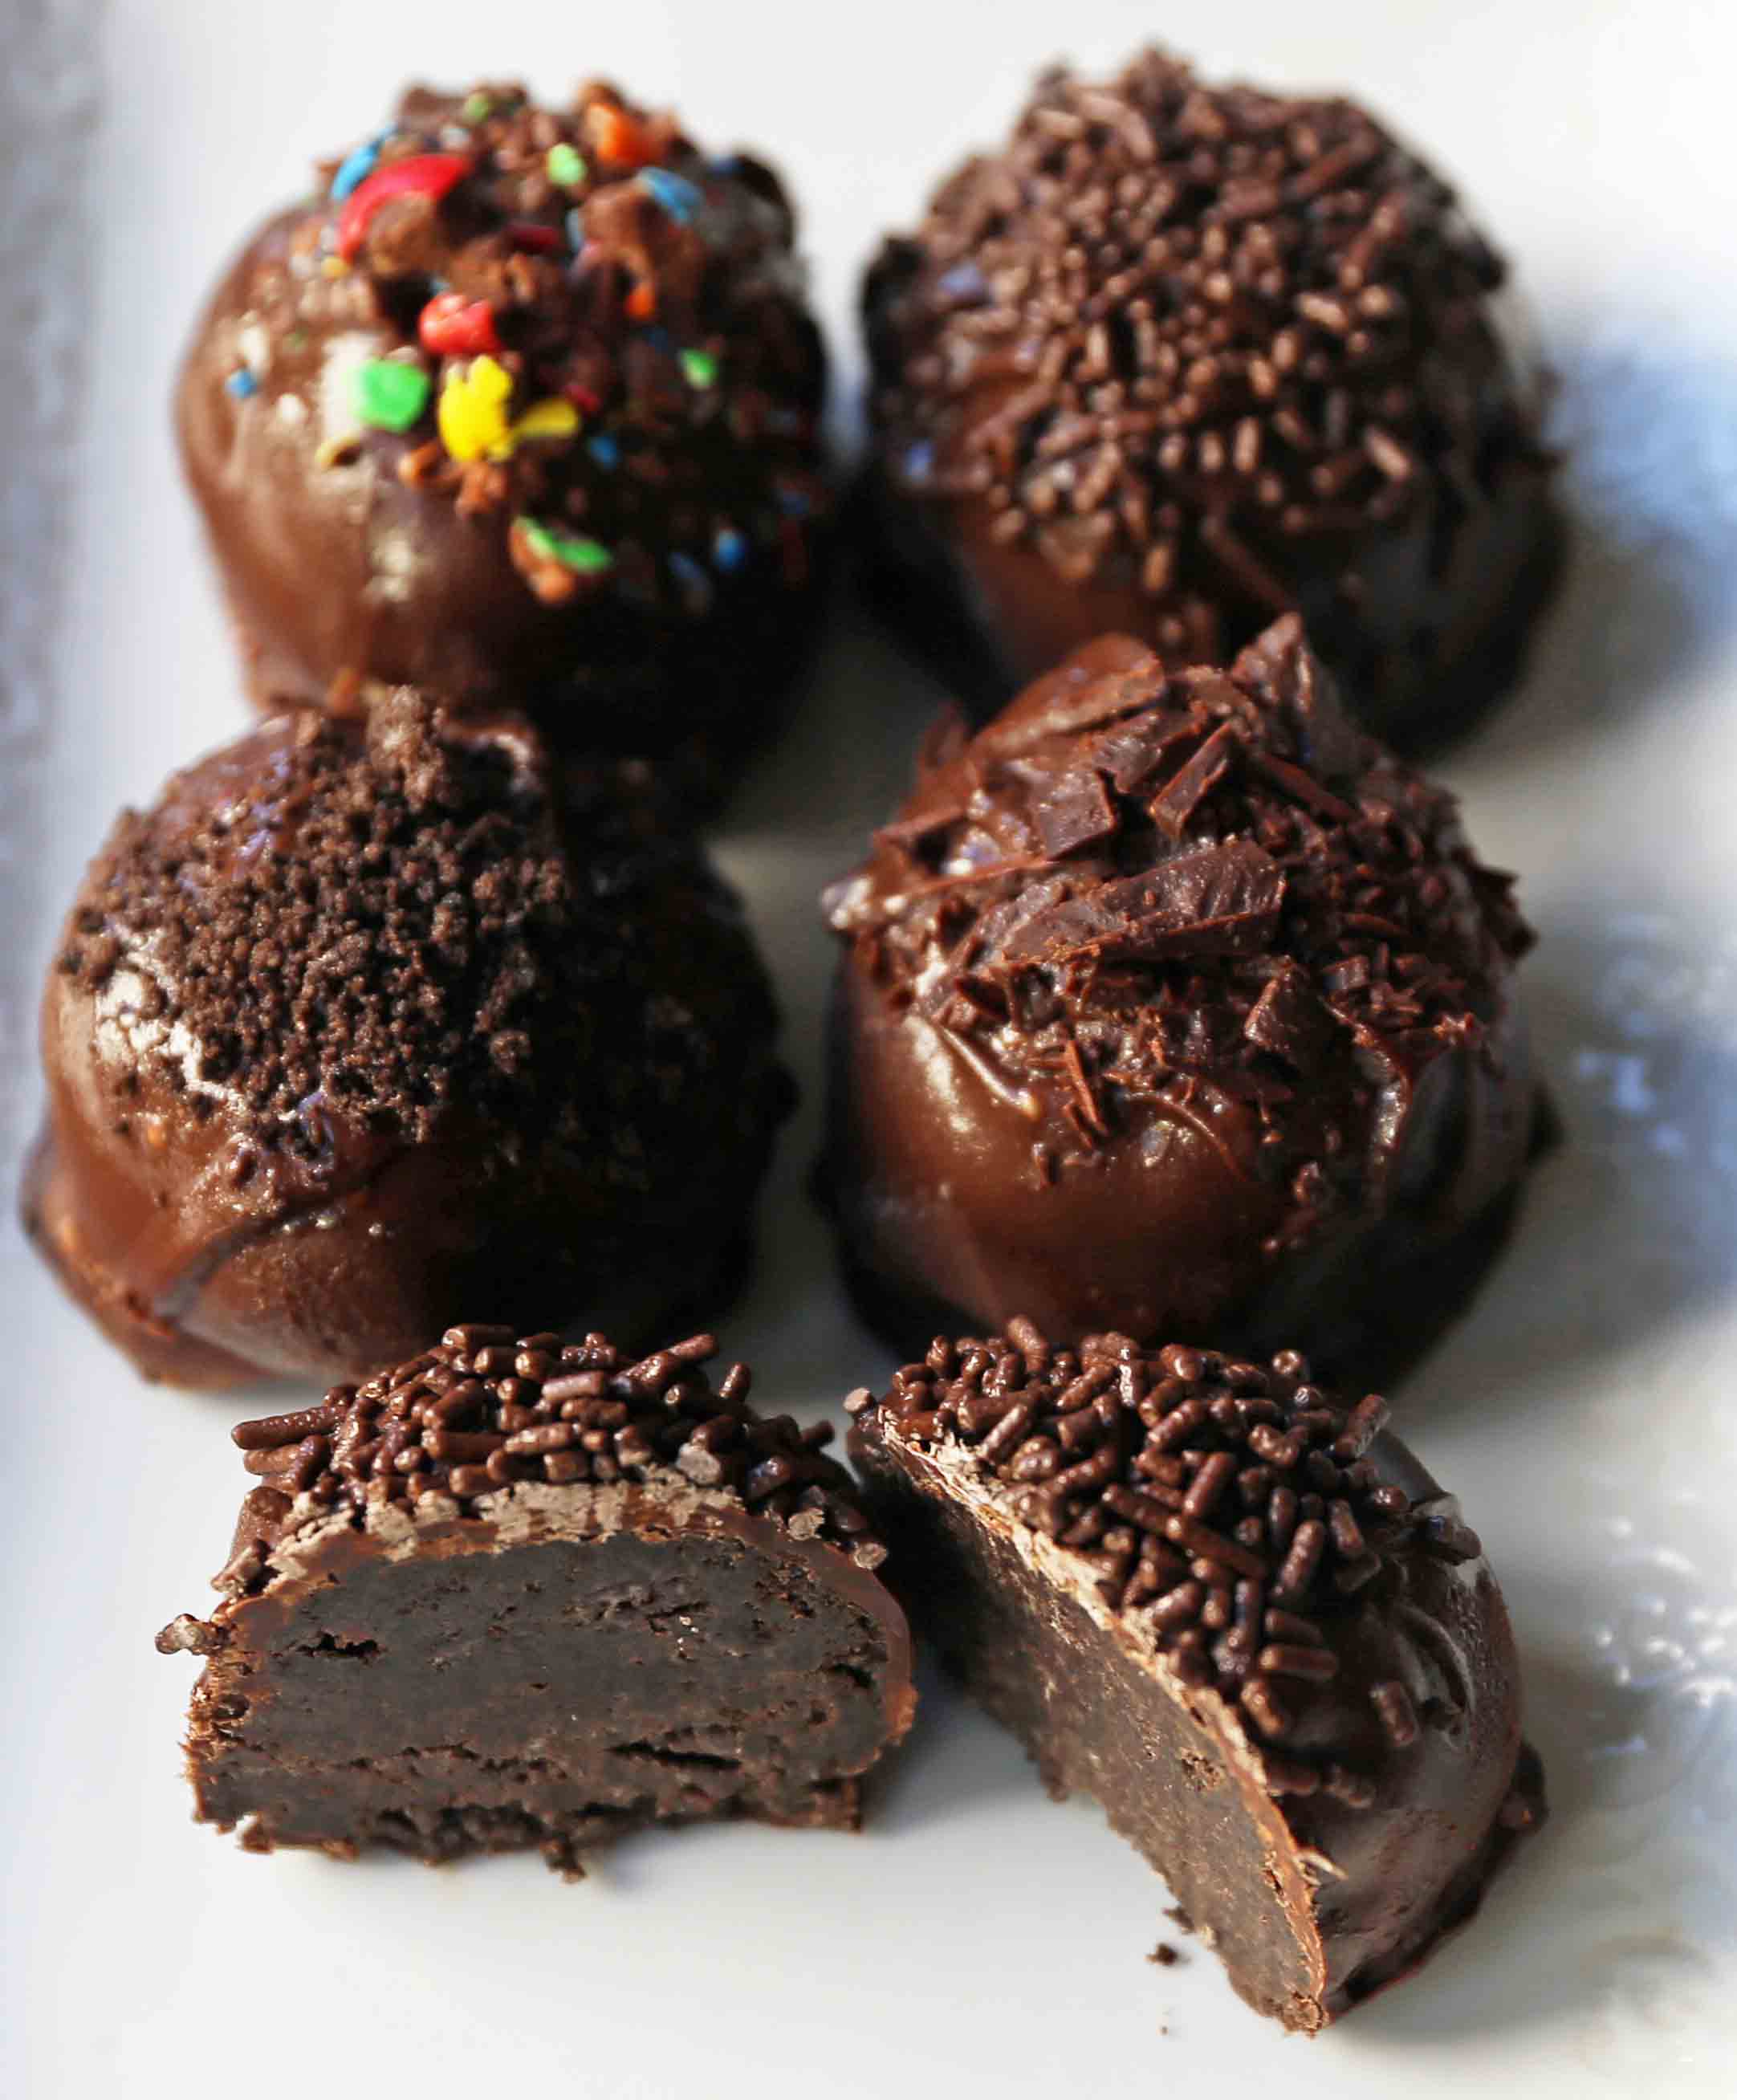 Oreo Truffles Recipe. Creamy Oreo truffles with a rich chocolate coating. An easy homemade chocolate truffle with only 4 ingredients! The BEST Oreo Truffles Recipe. www.modernhoney.com #truffles #truffle #chocolatetruffle #oreotruffle #oreotruffles #christmasgoodies 